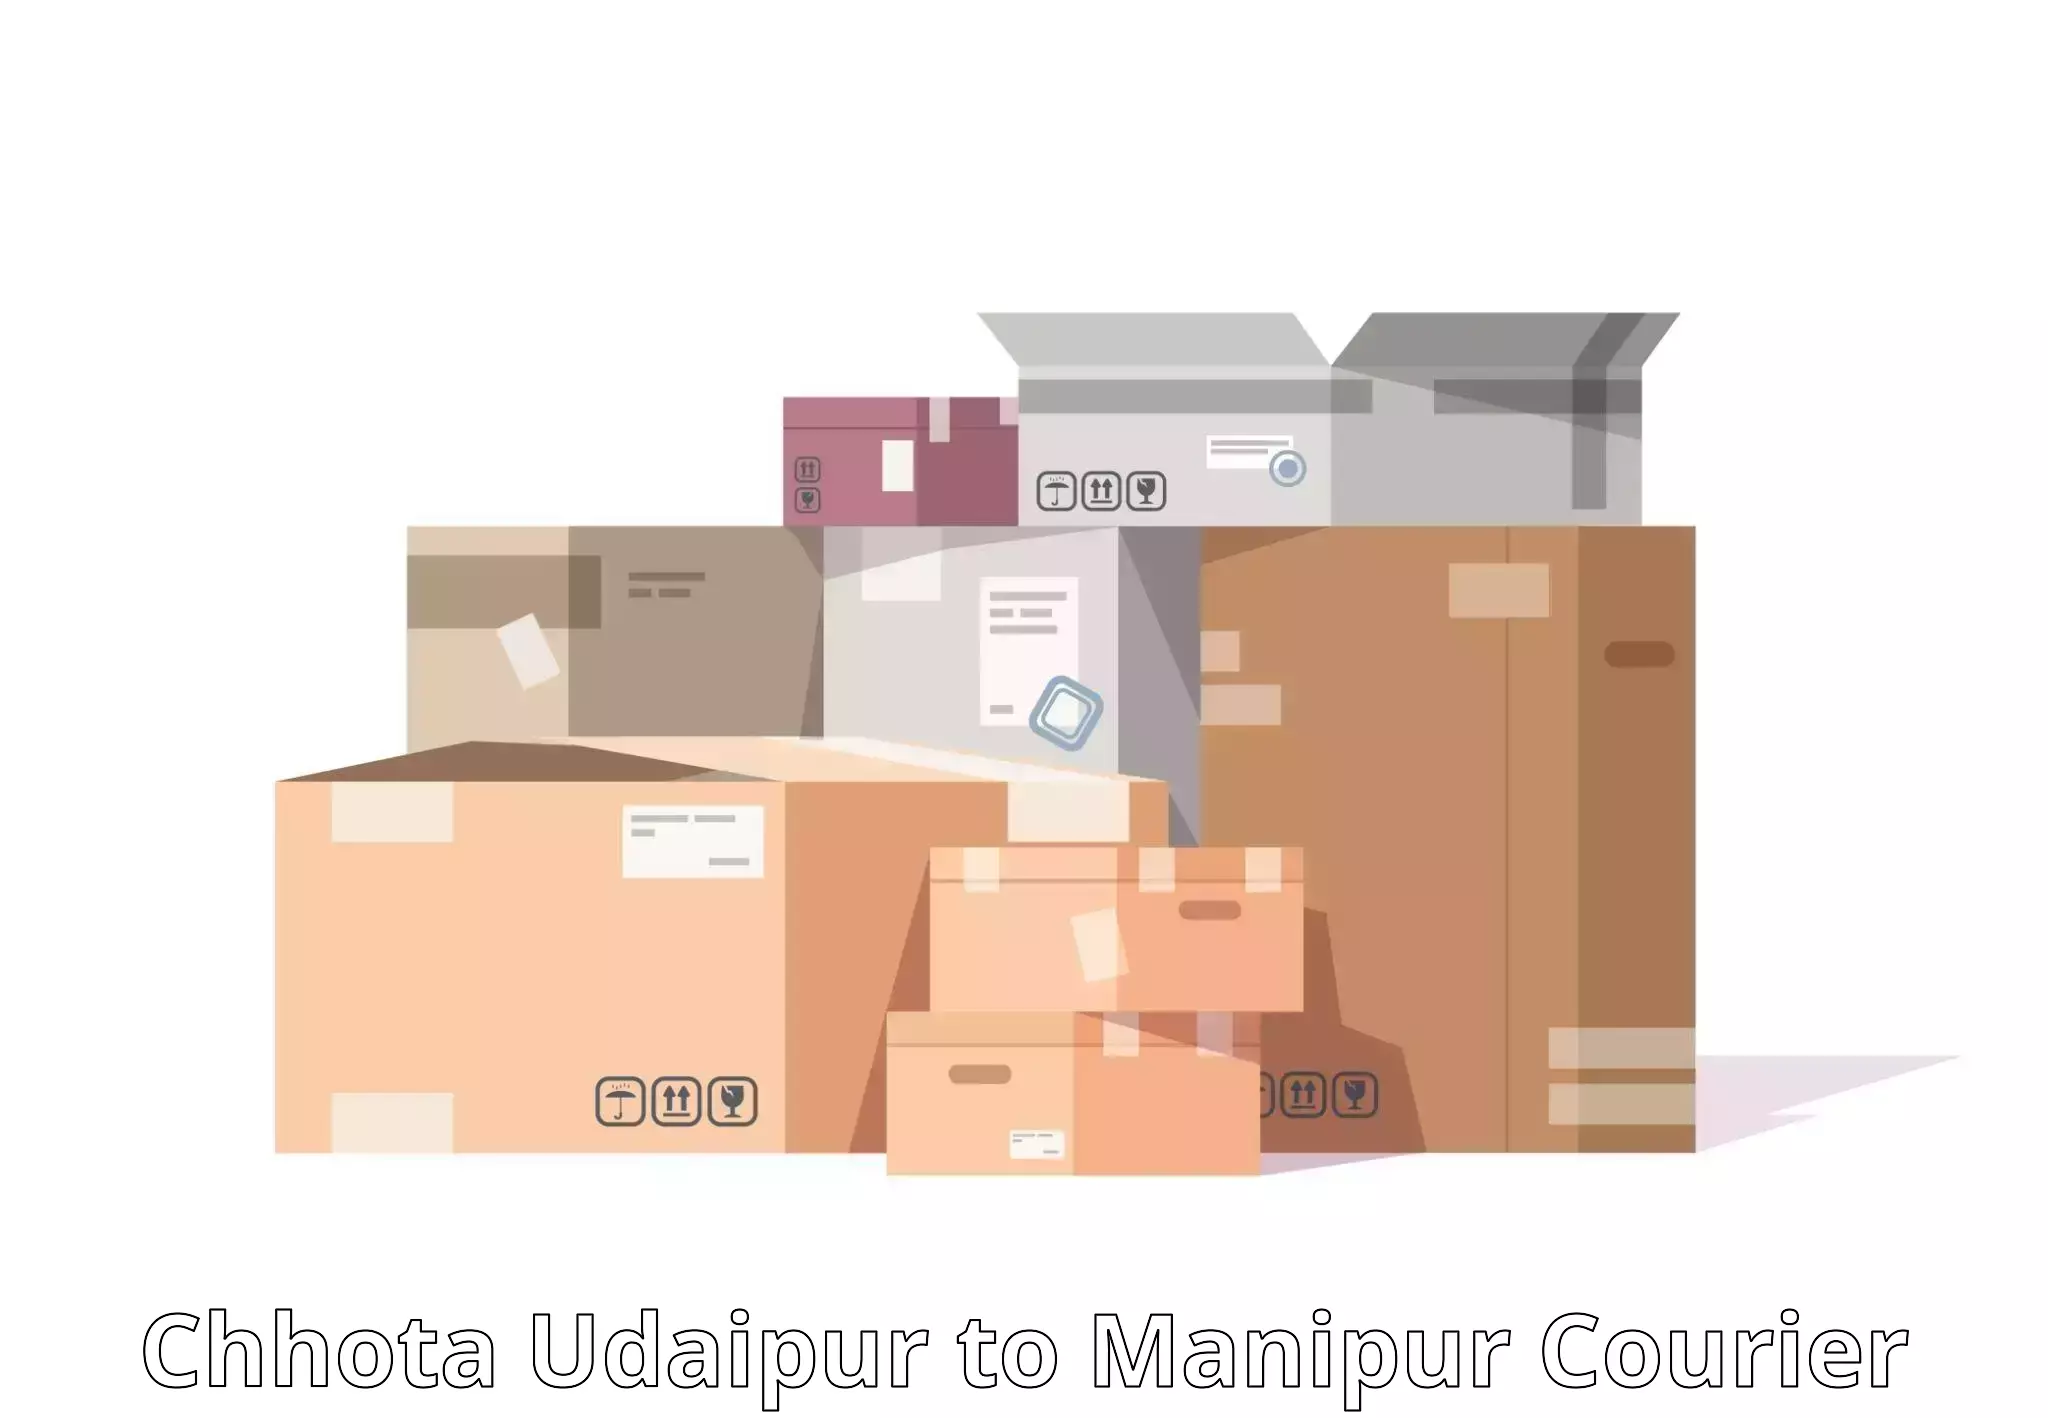 Package delivery network Chhota Udaipur to Imphal